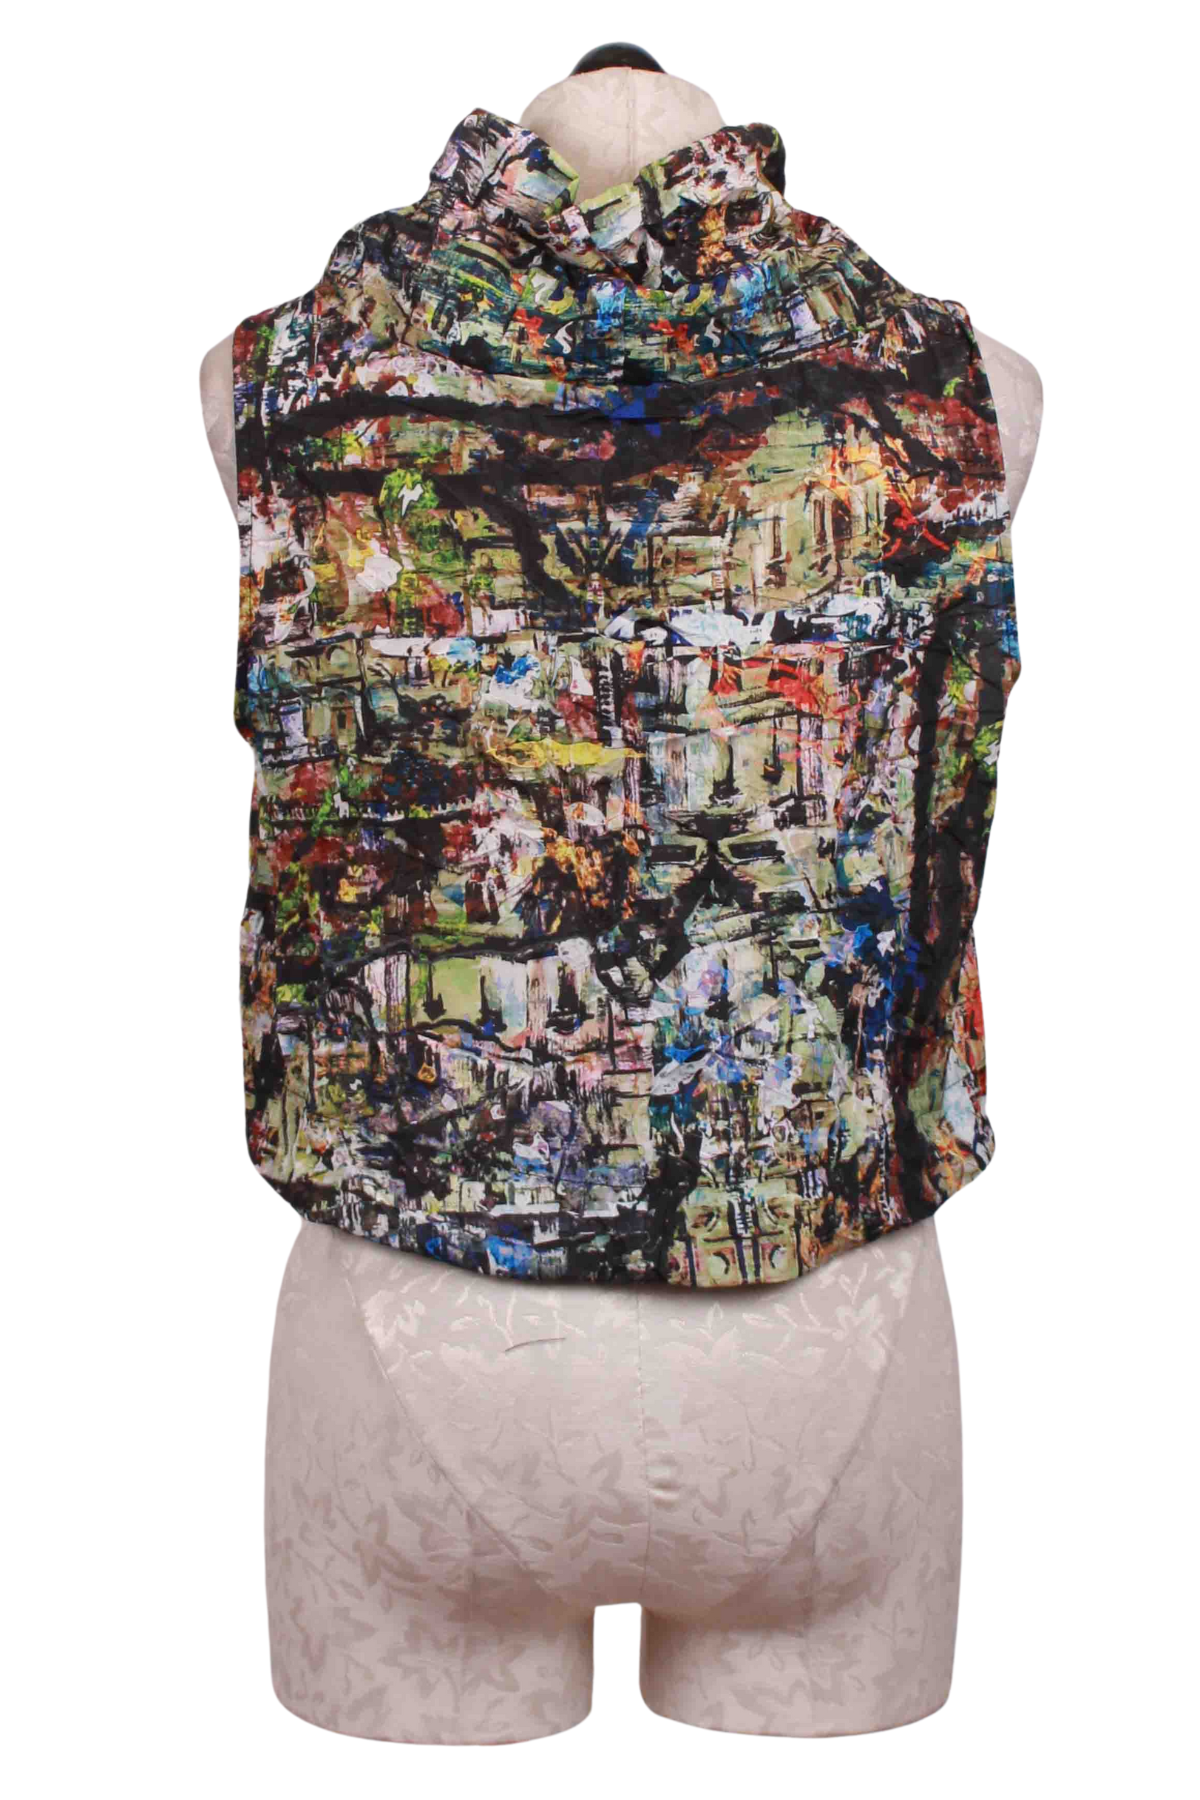 back view of Alexa Vest&nbsp;by Kozan in the fun colorful City Print